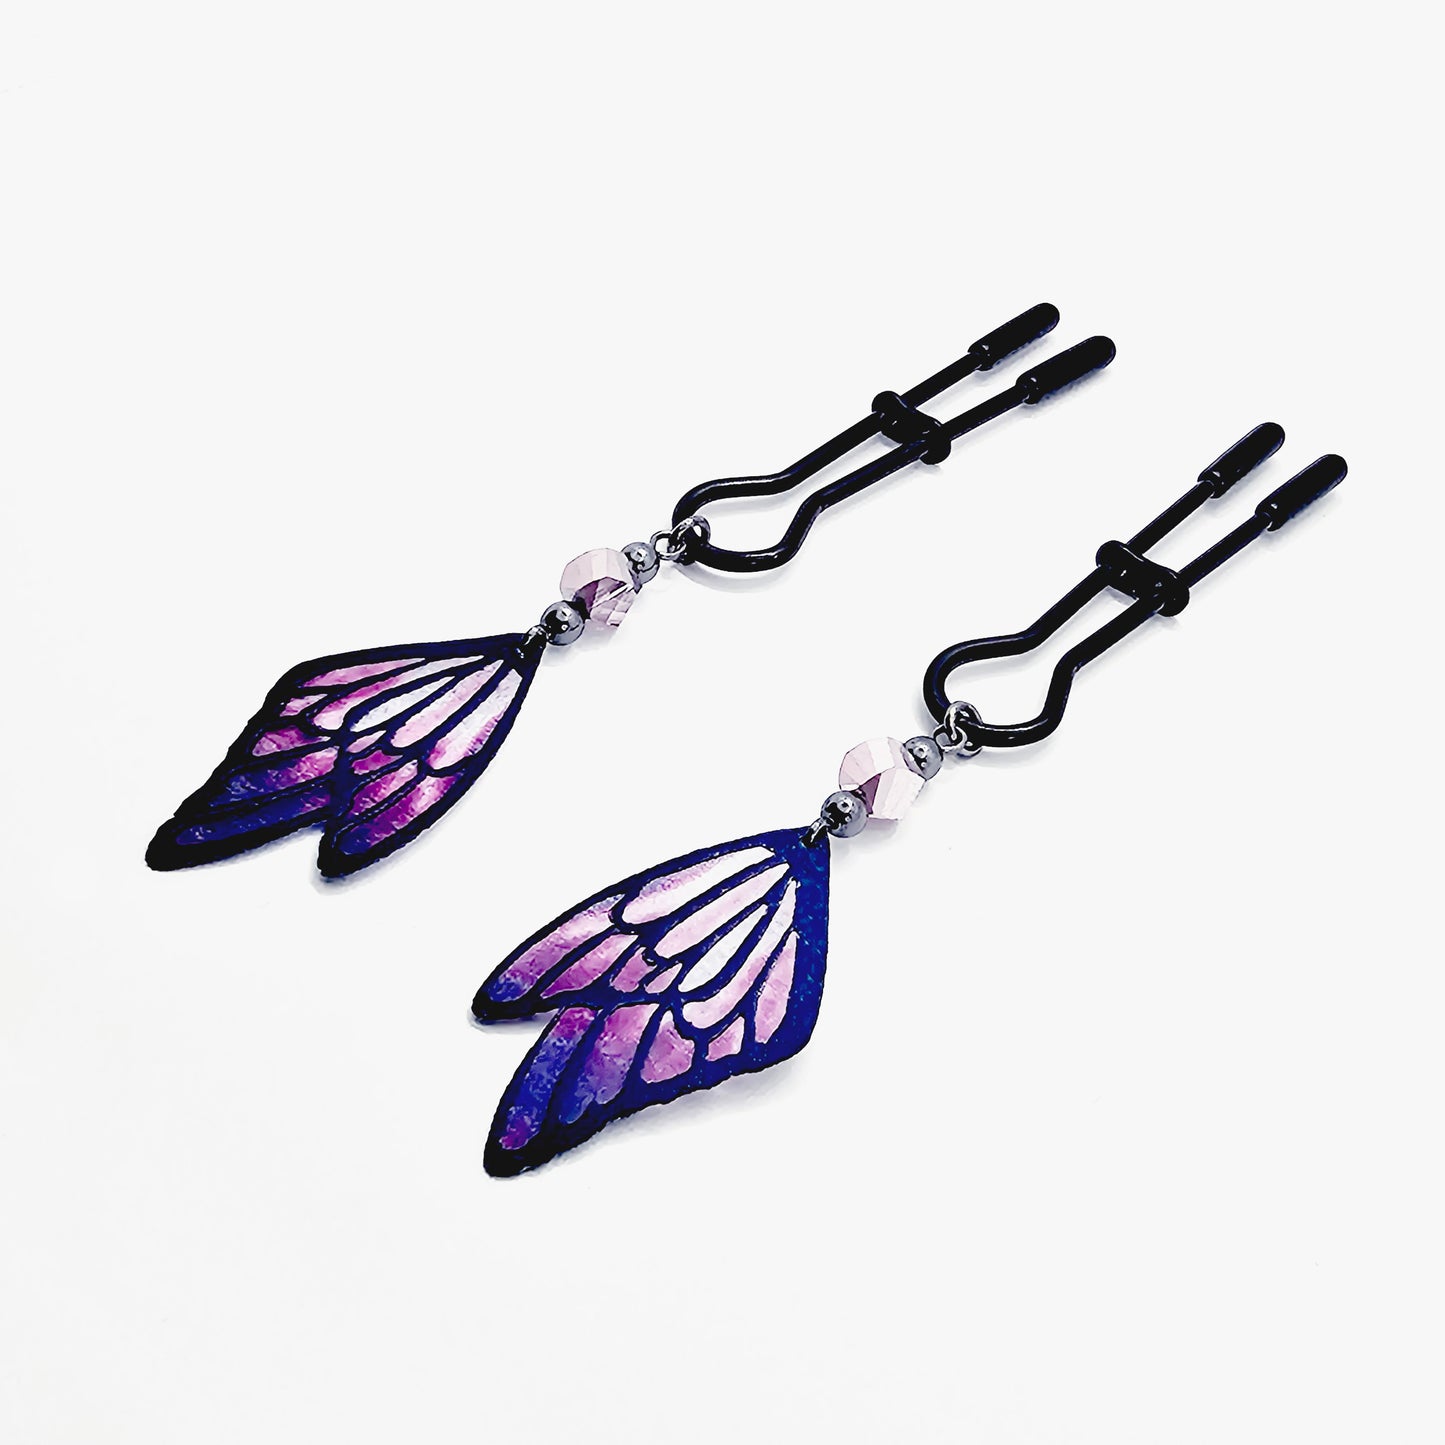 Black Nipple Clamps with Beads and Butterfly Wings. Straight Tweezer Clamps